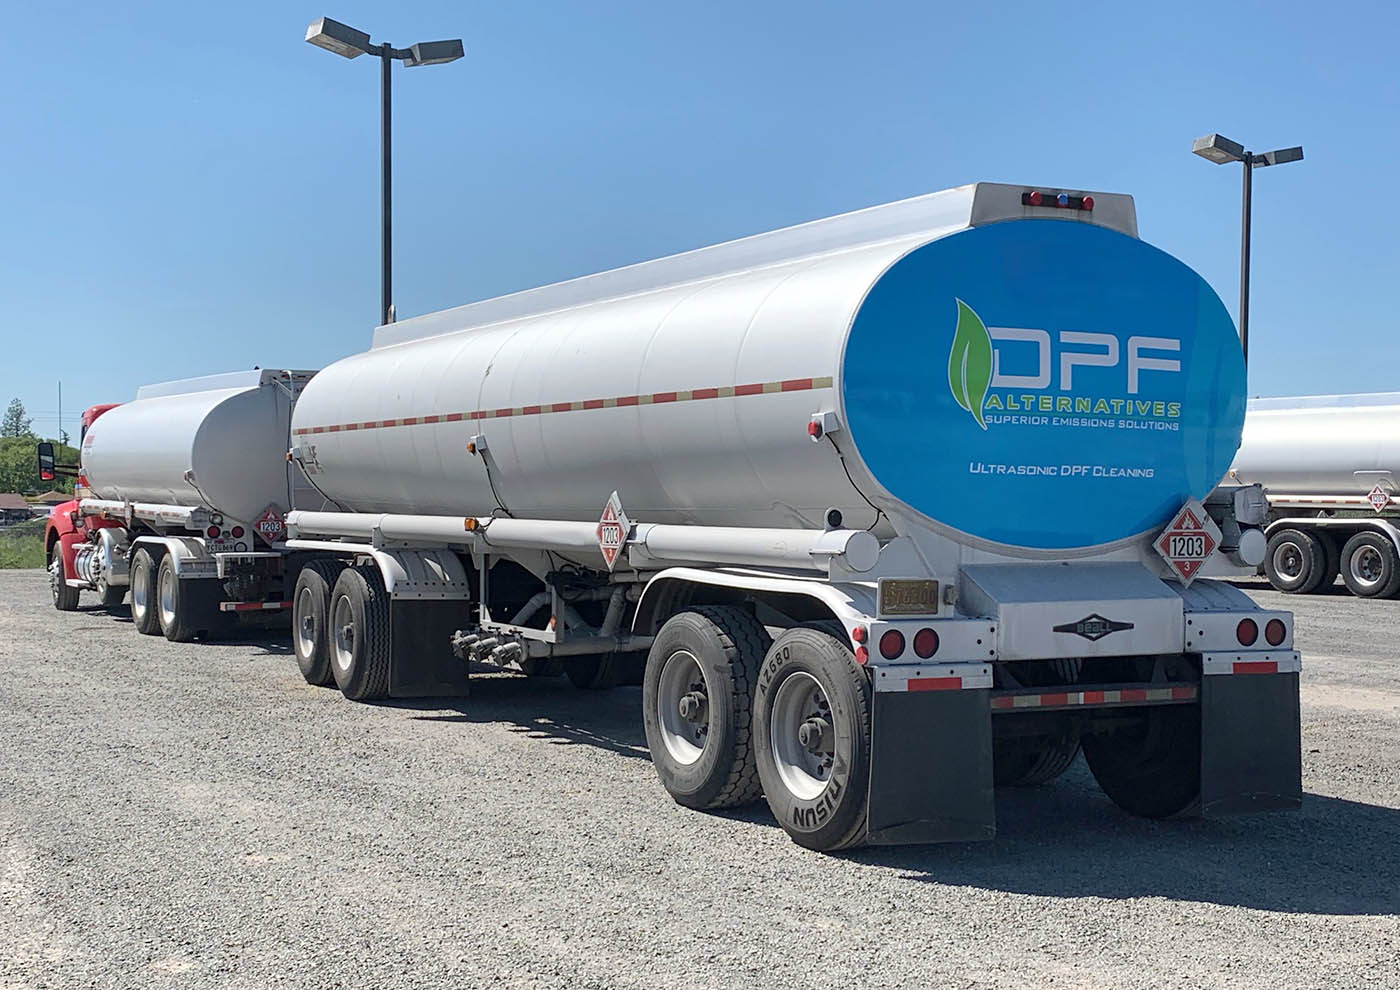 Back of a clean, large, reflective semi truck rig, contact DPF Alternatives for a DPF cleaning.